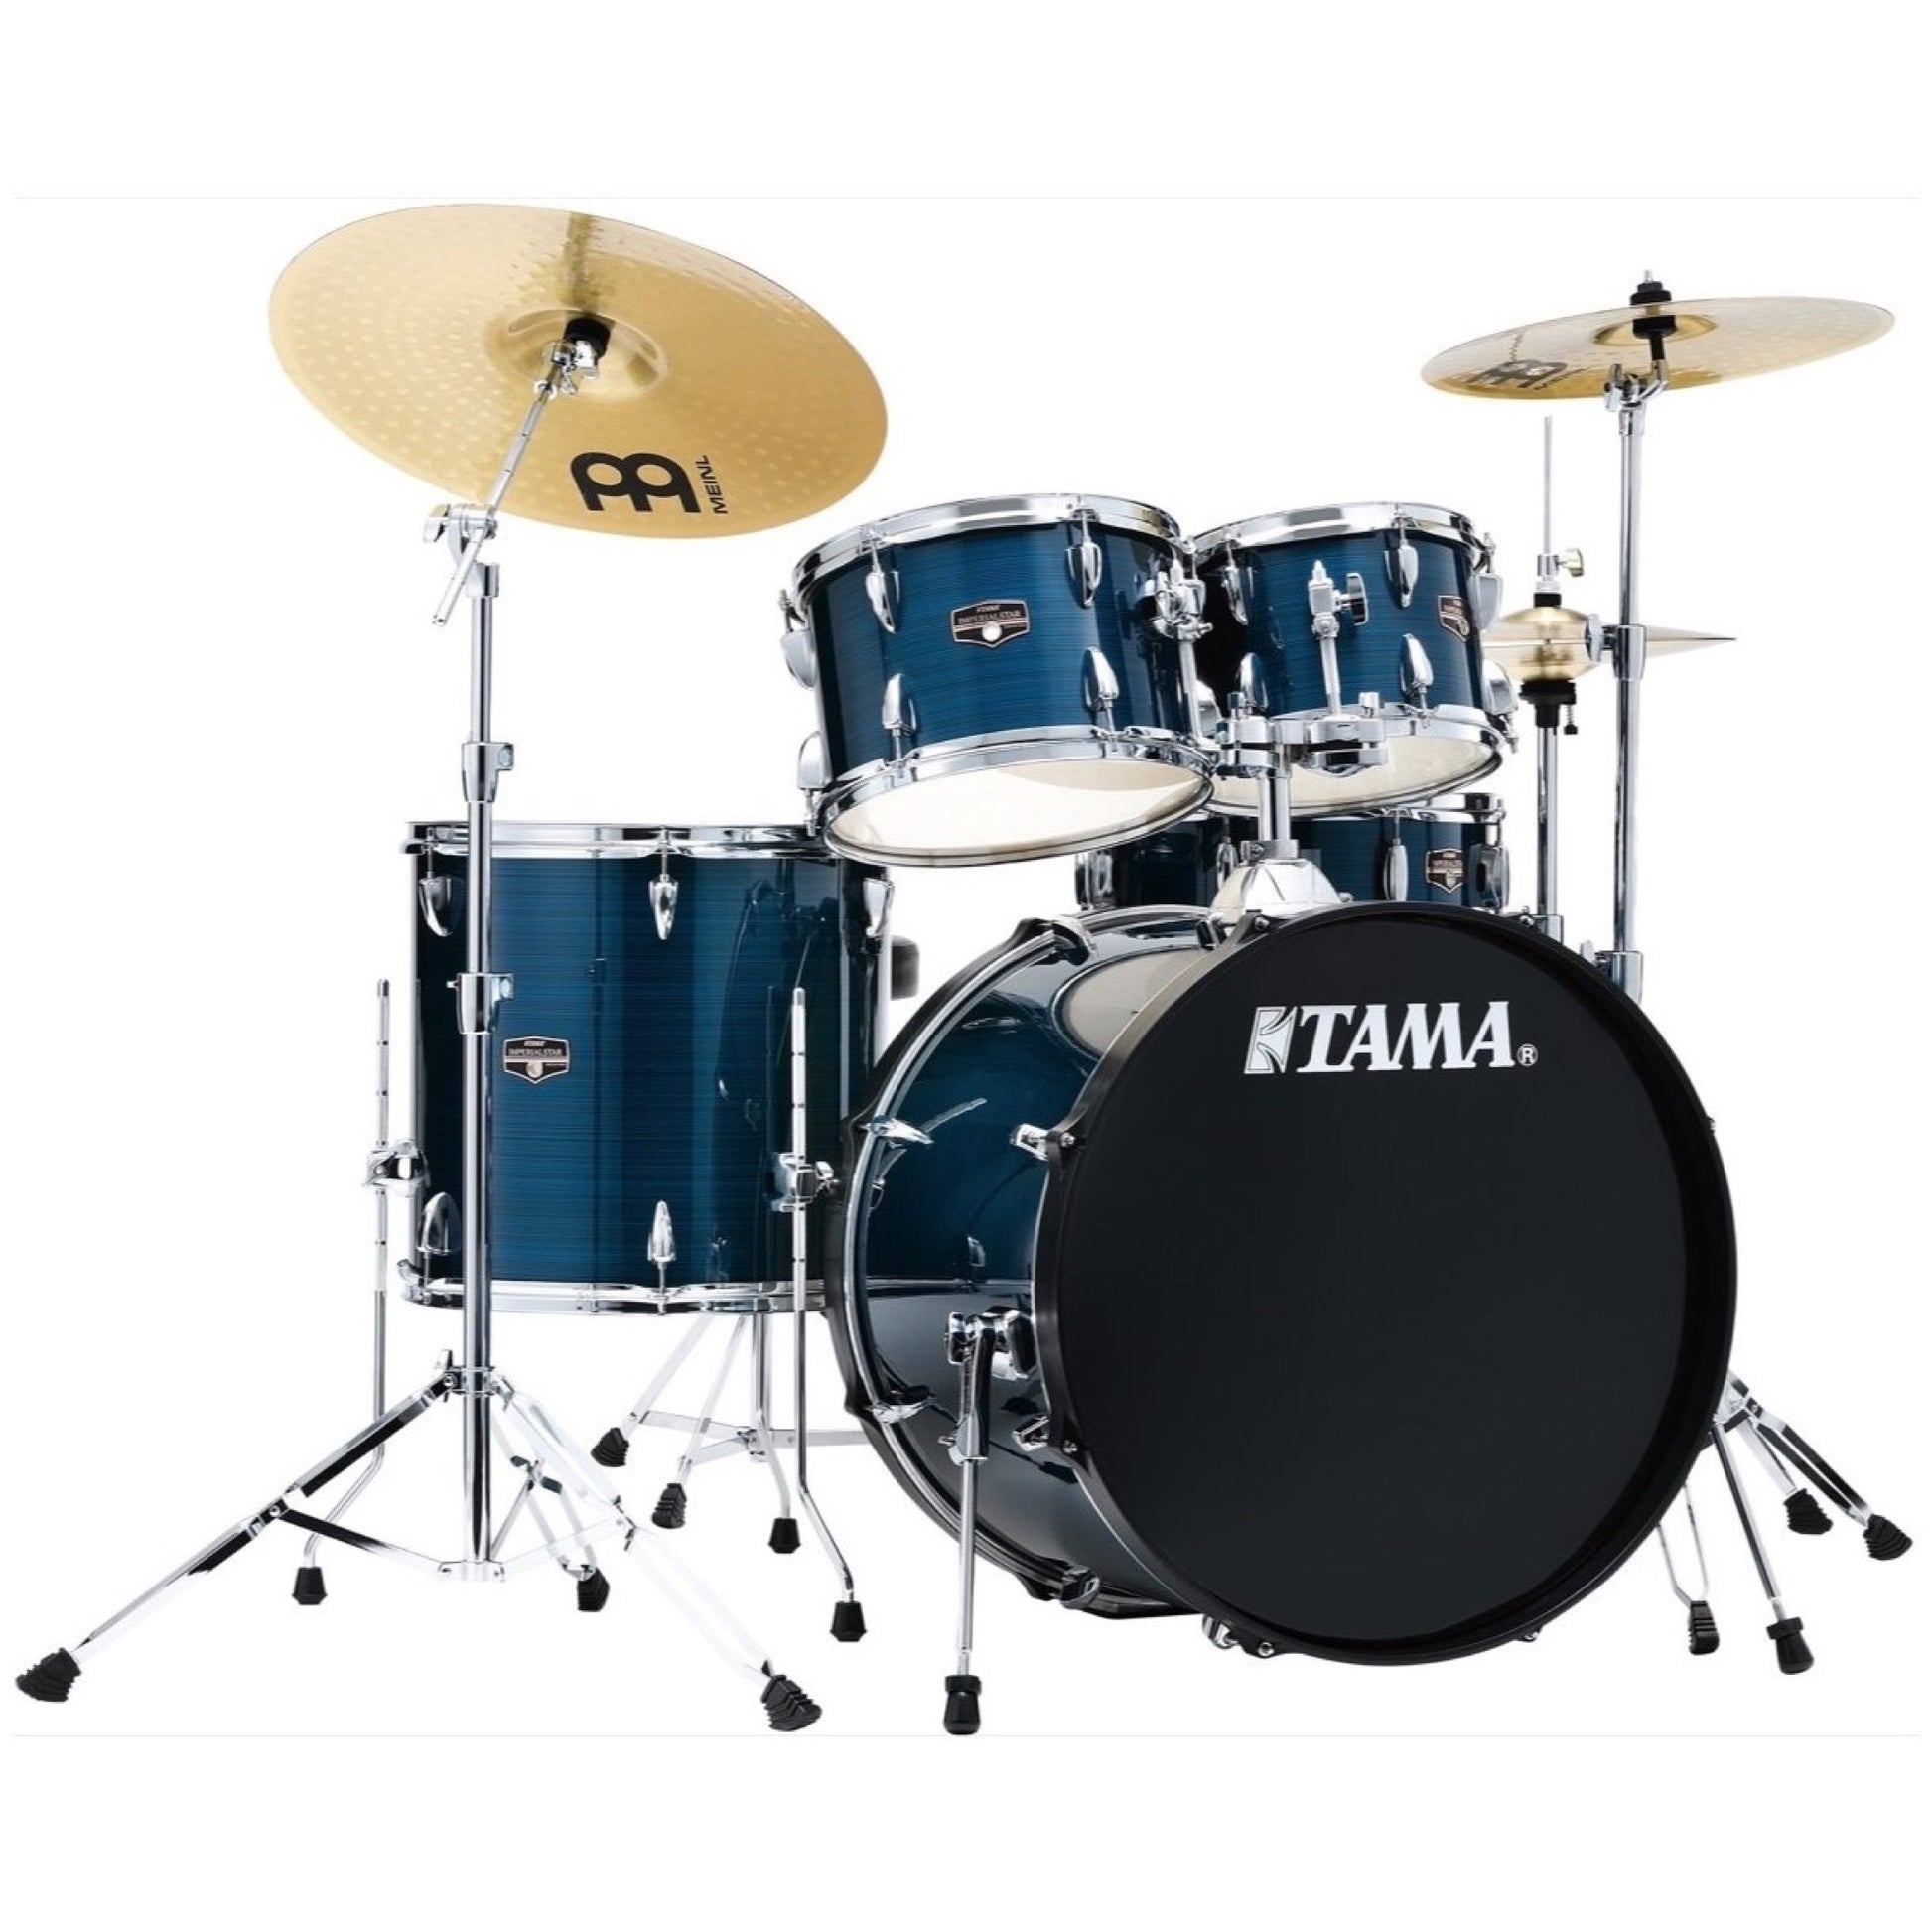 Tama IE52C Imperialstar Drum Kit, 5-Piece (with Meinl Cymbals), Hairline Blue